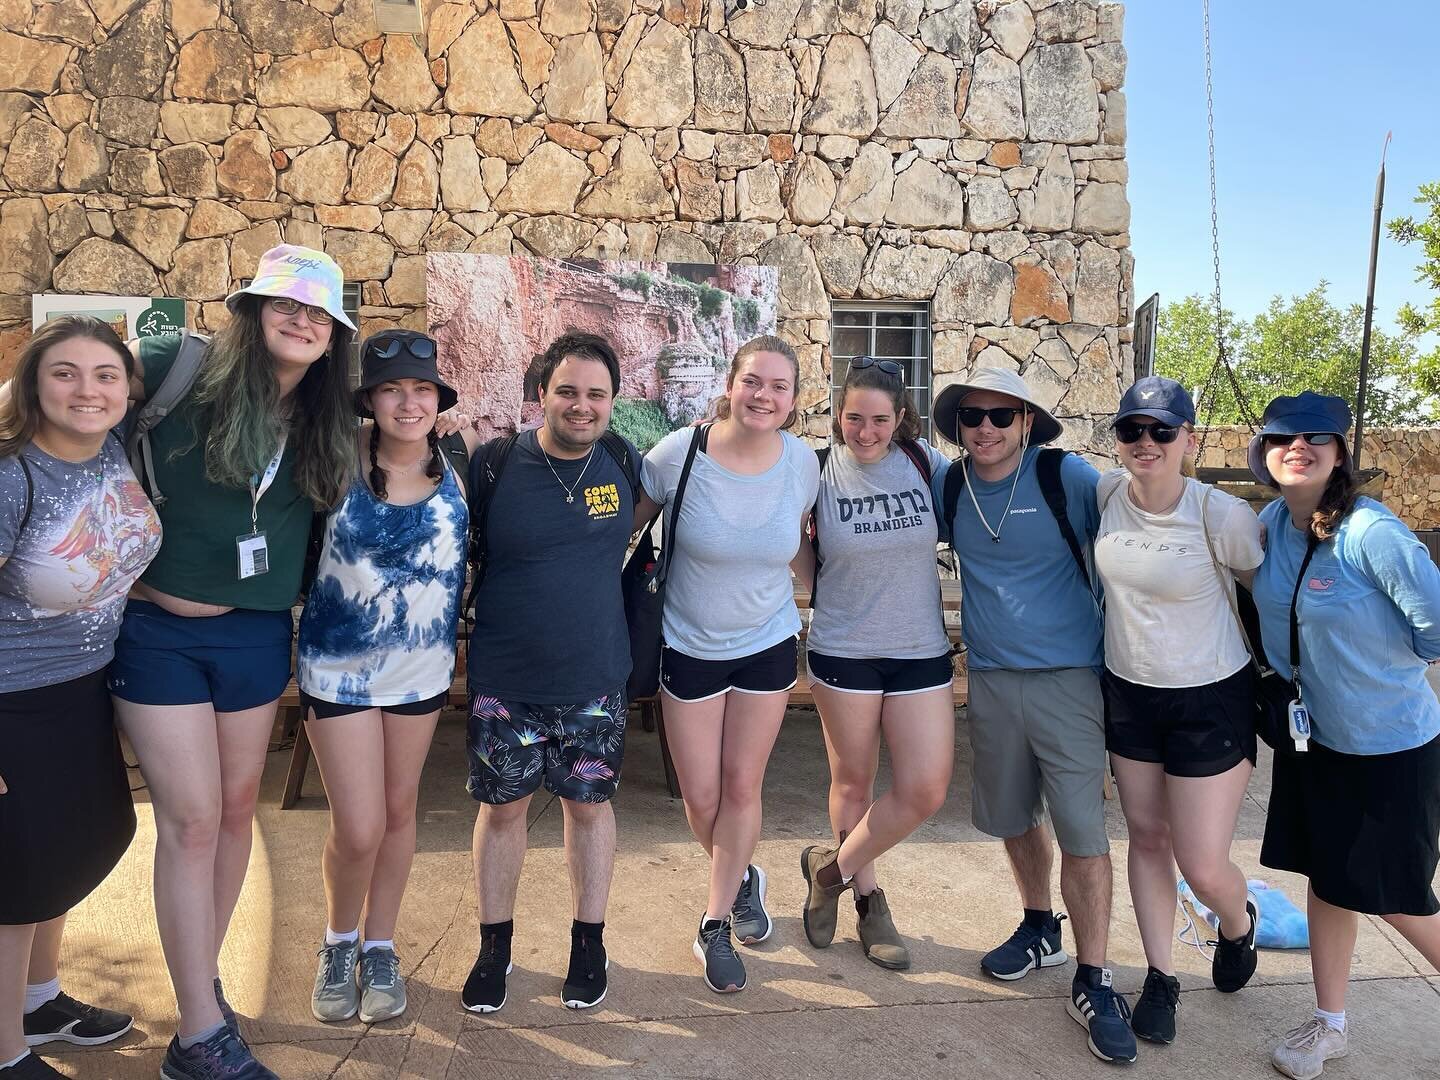 Looking to travel to Israel this summer? There are three options! 
Swipe through to learn more and see some familiar faces 😊

DM me for more information 🙂

💙🇮🇱💙